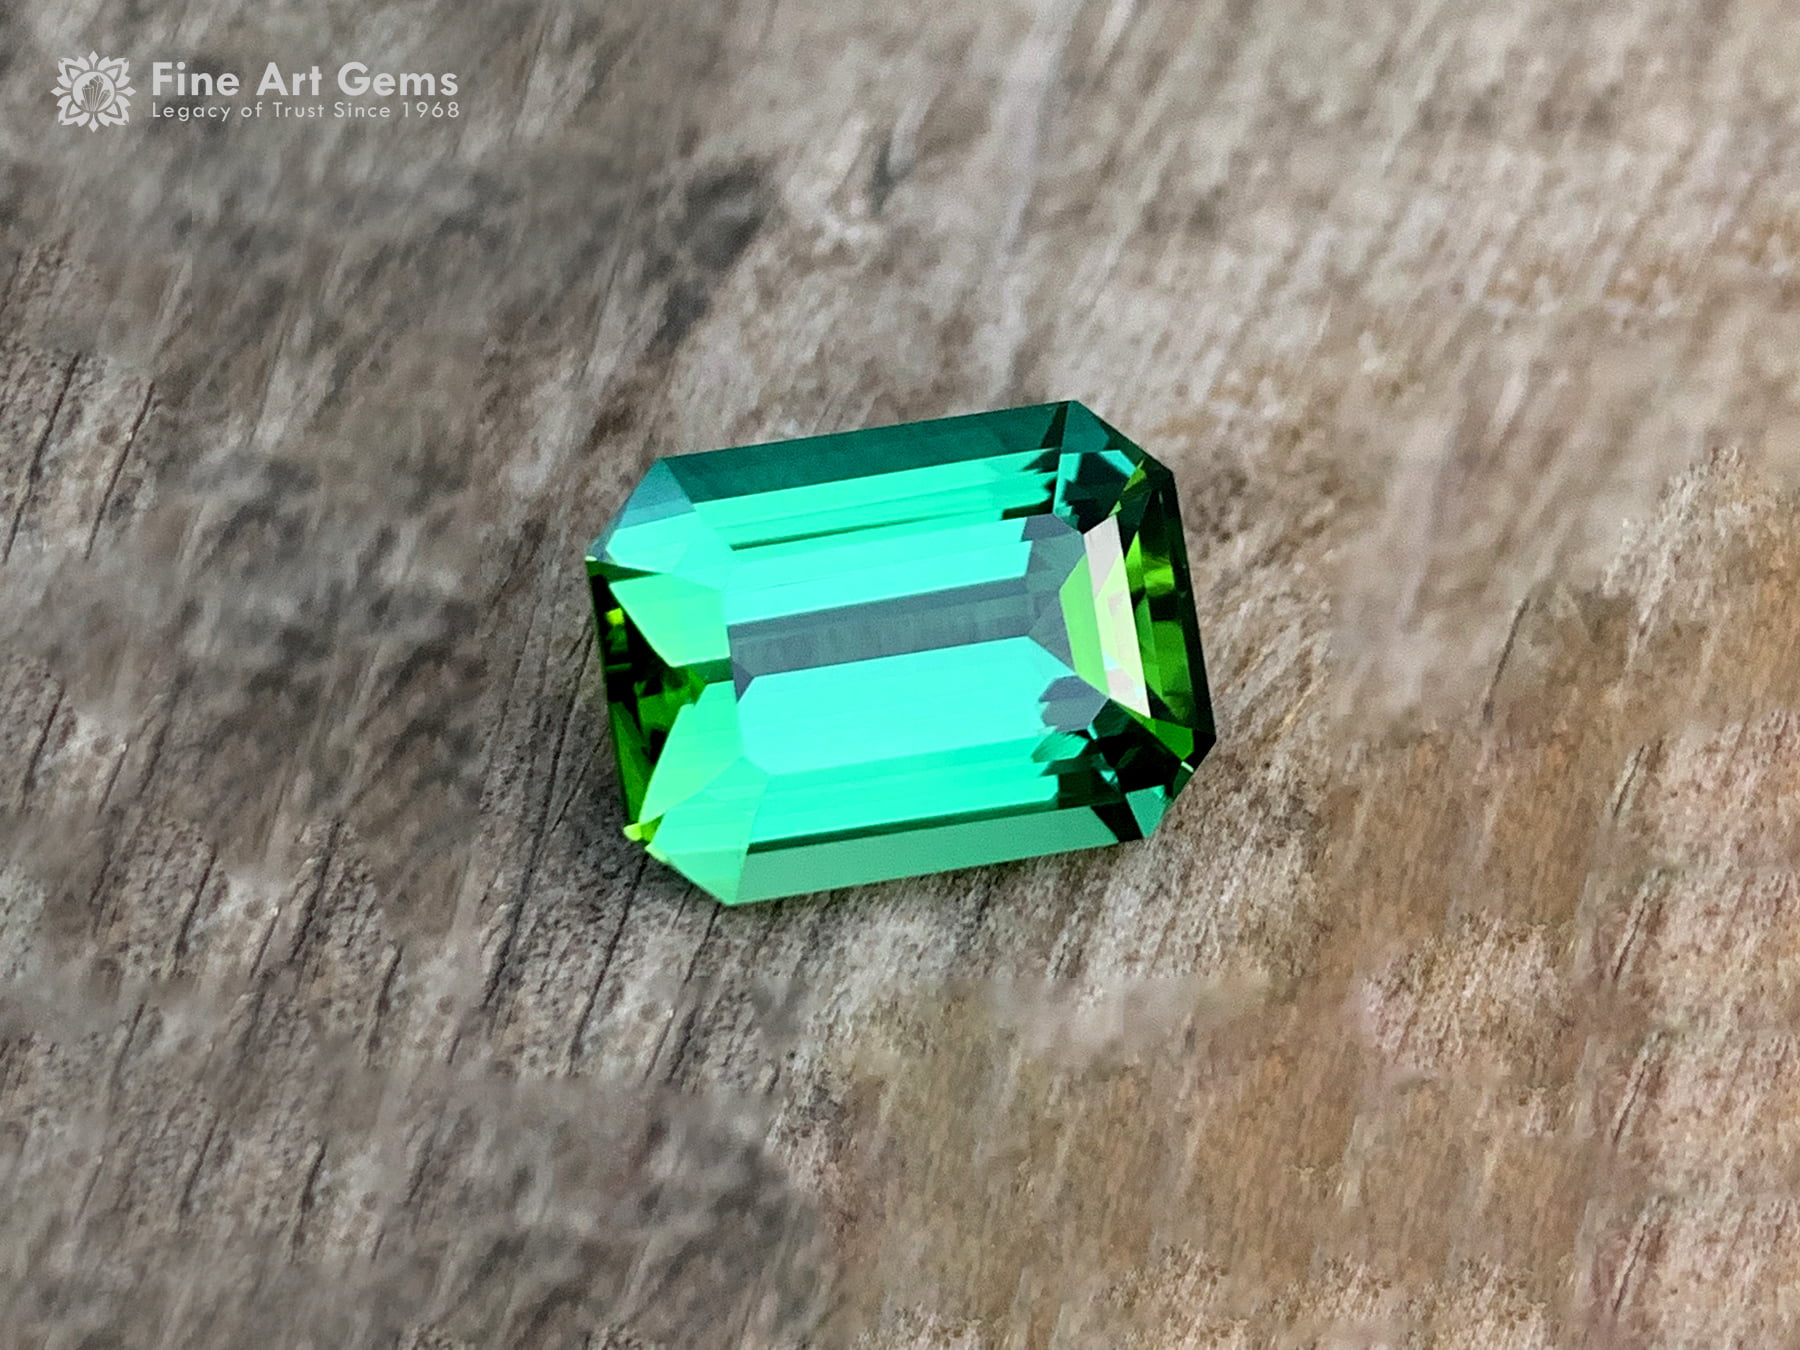 9.7 Carats Flawless Tourmaline Gemstone from Afghanistan